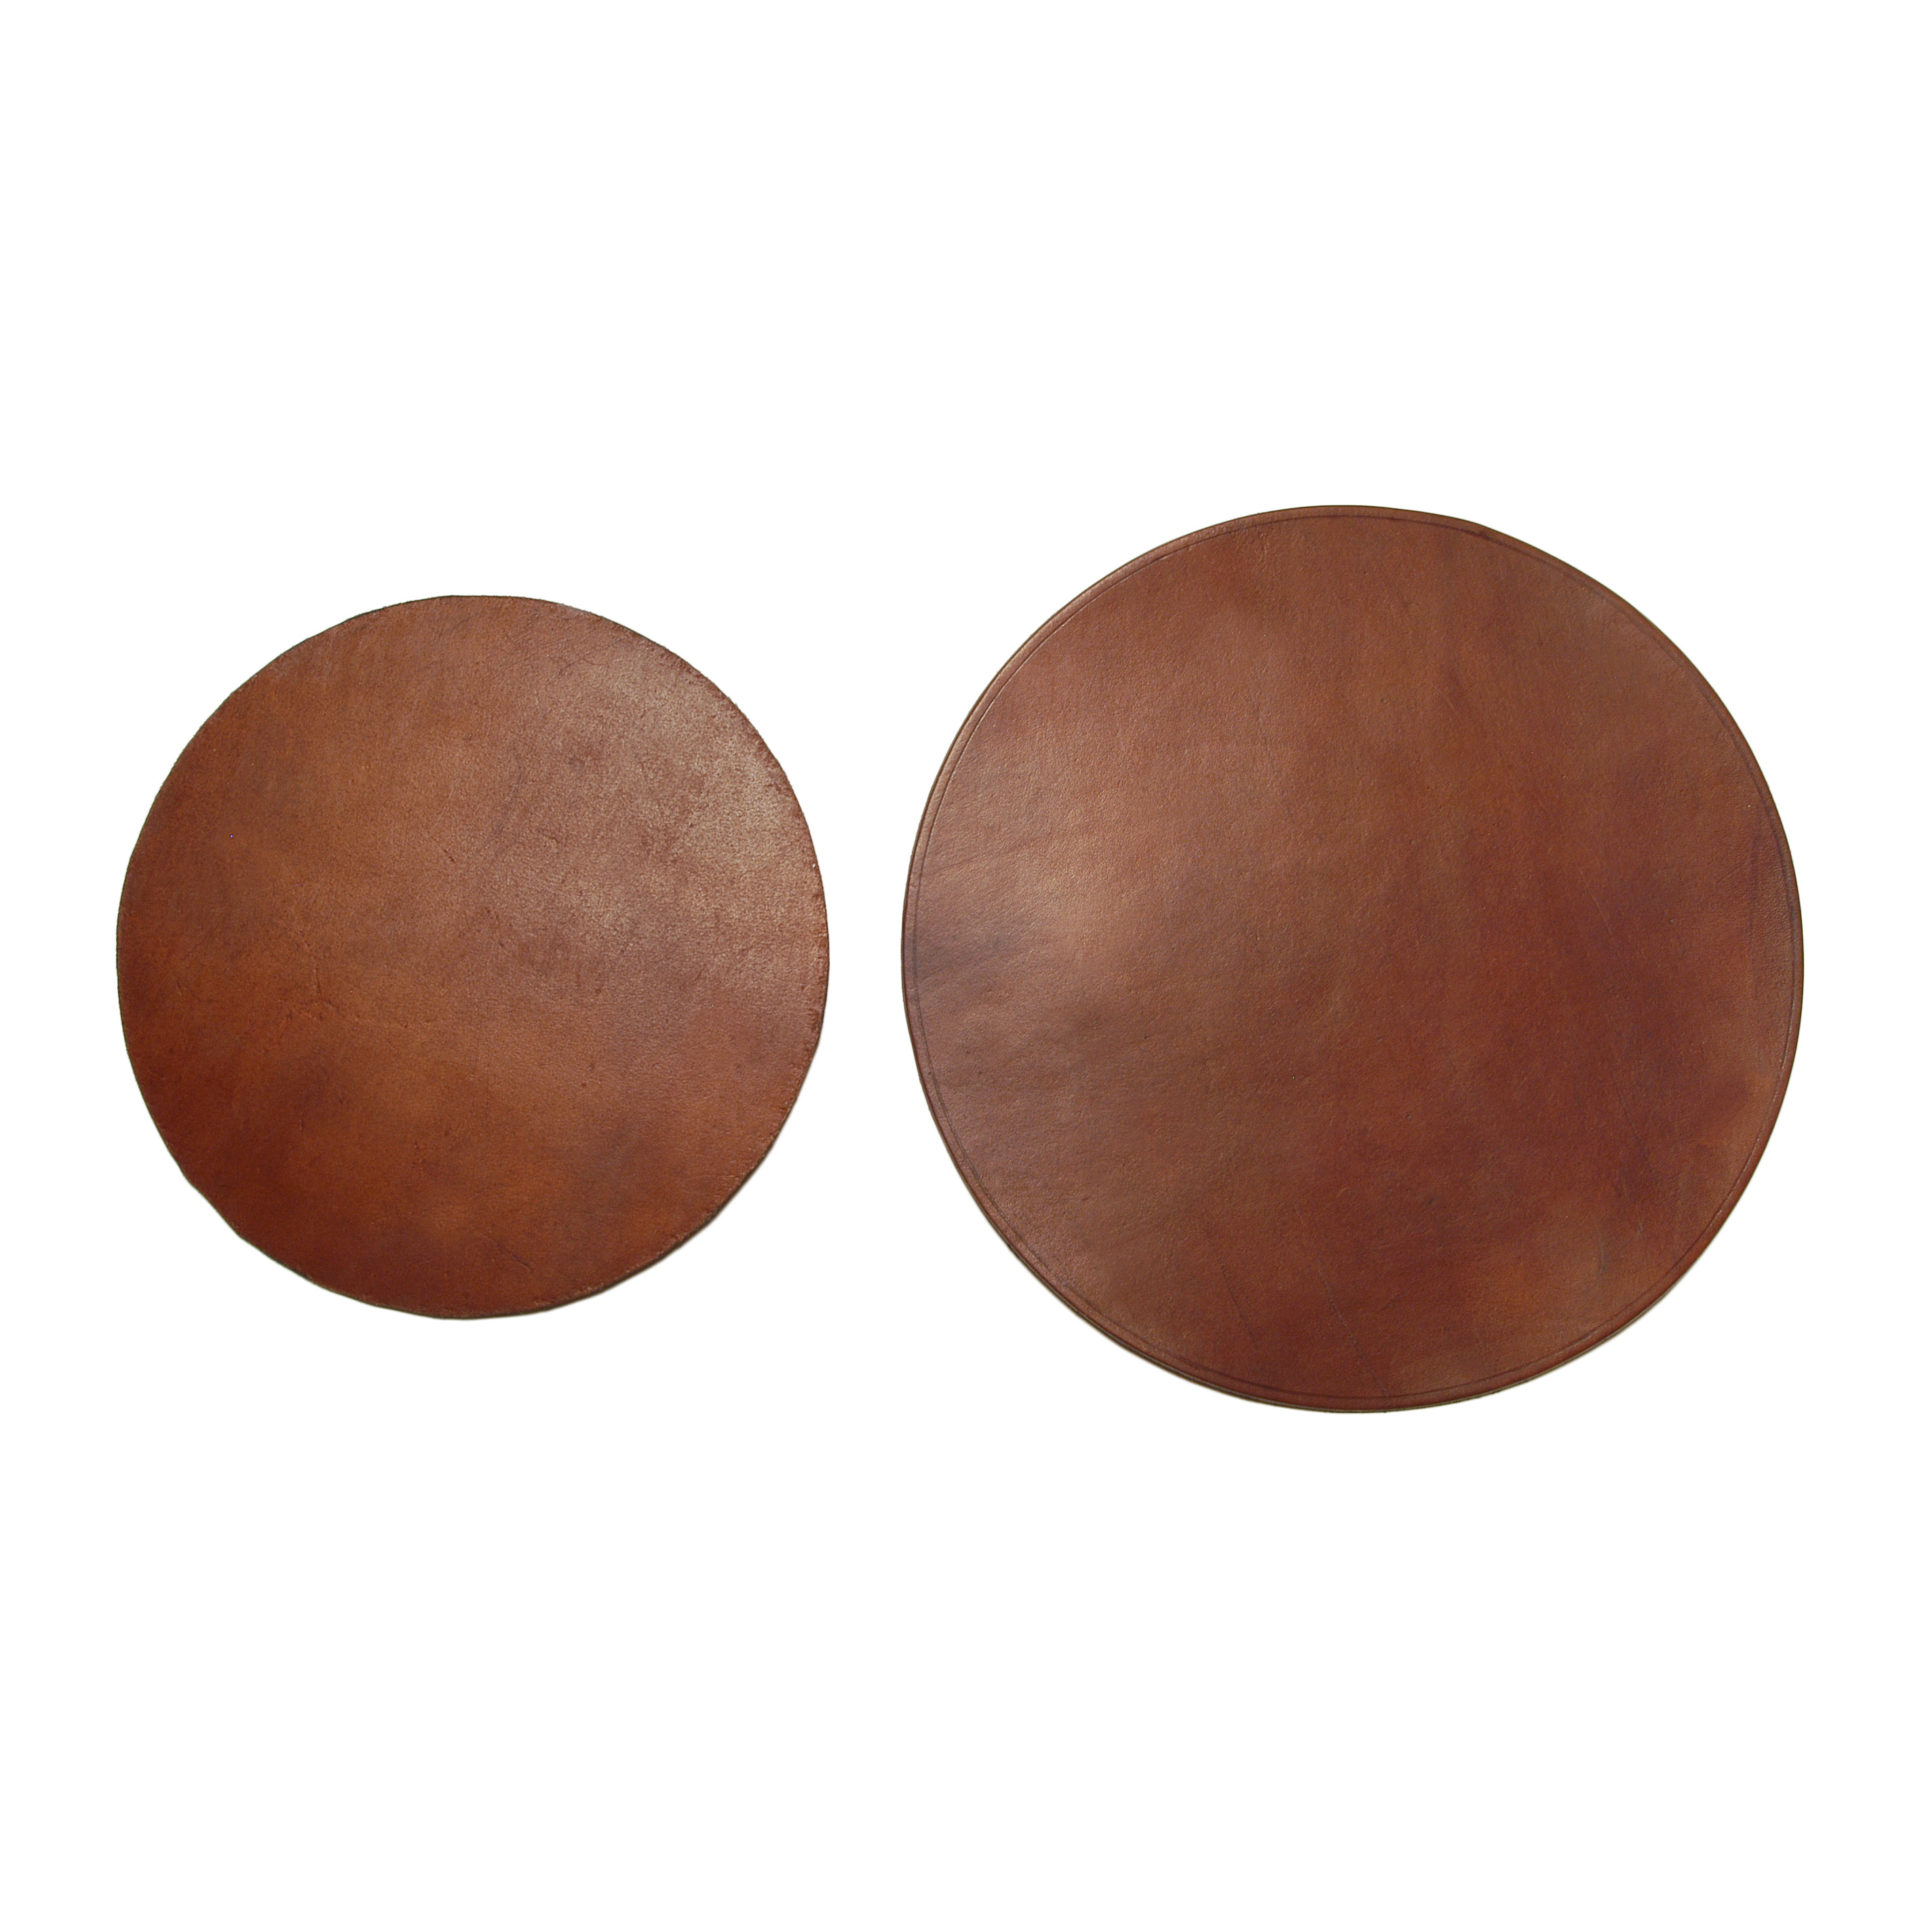 Leather Placemats Great English Outdoors, Brown Leather Placemats